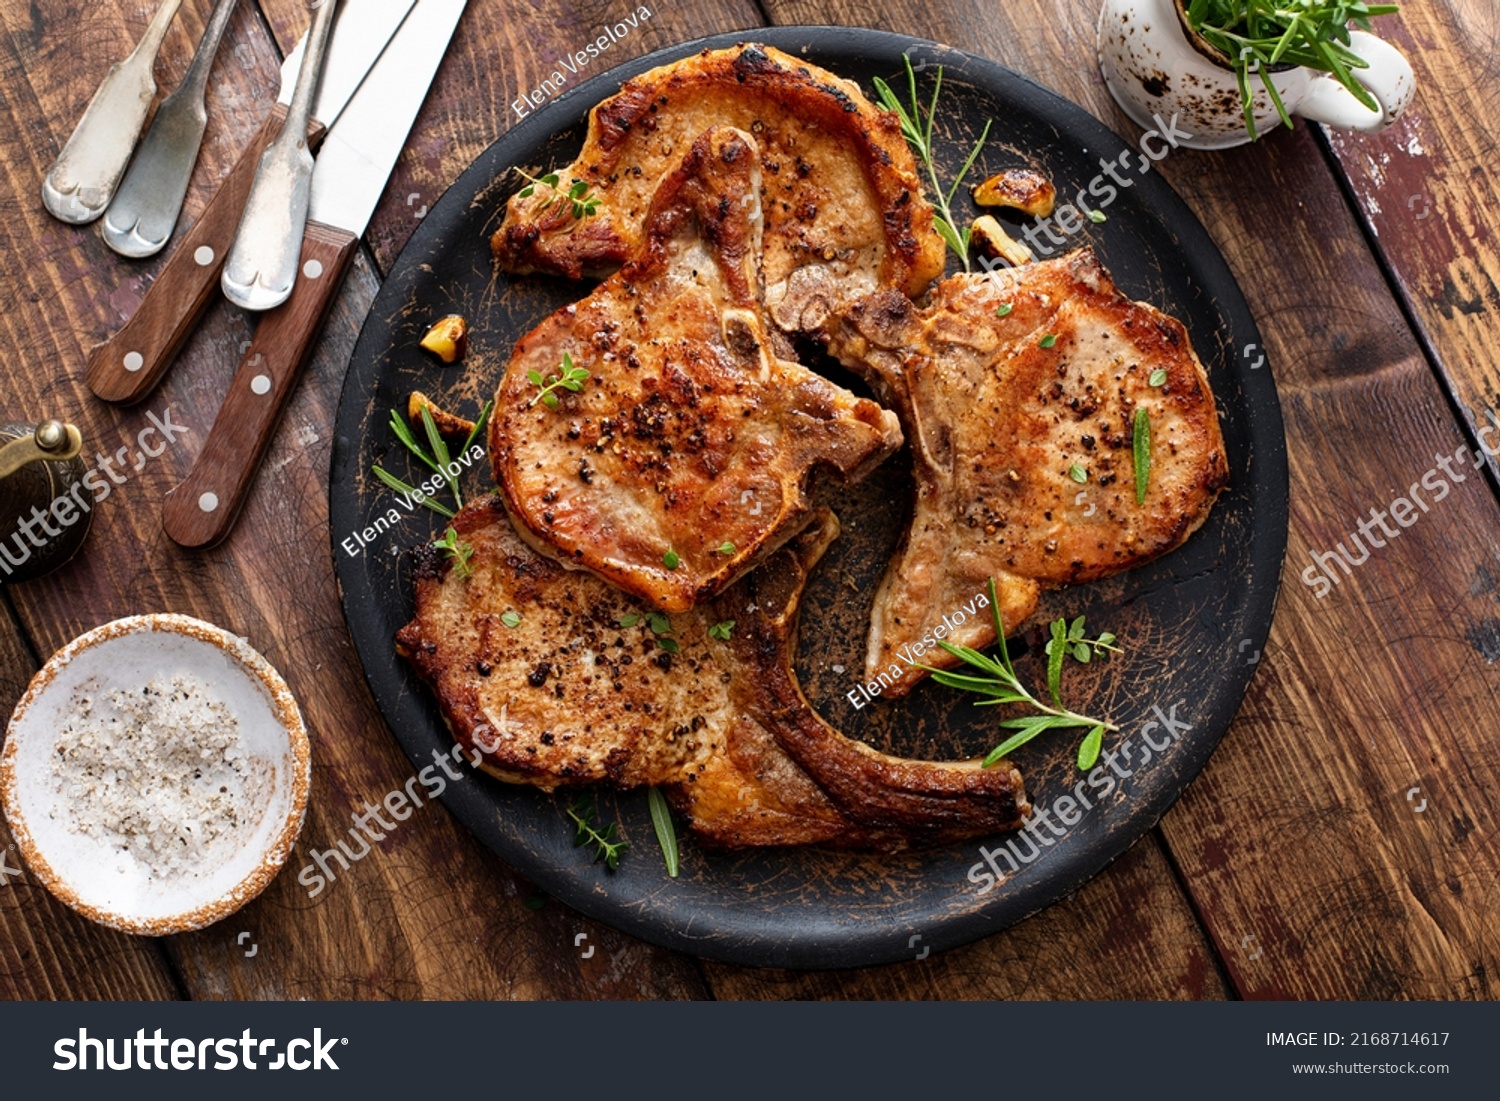 Grilled or pan fried pork chops on the bone with garlic and rosemary #2168714617